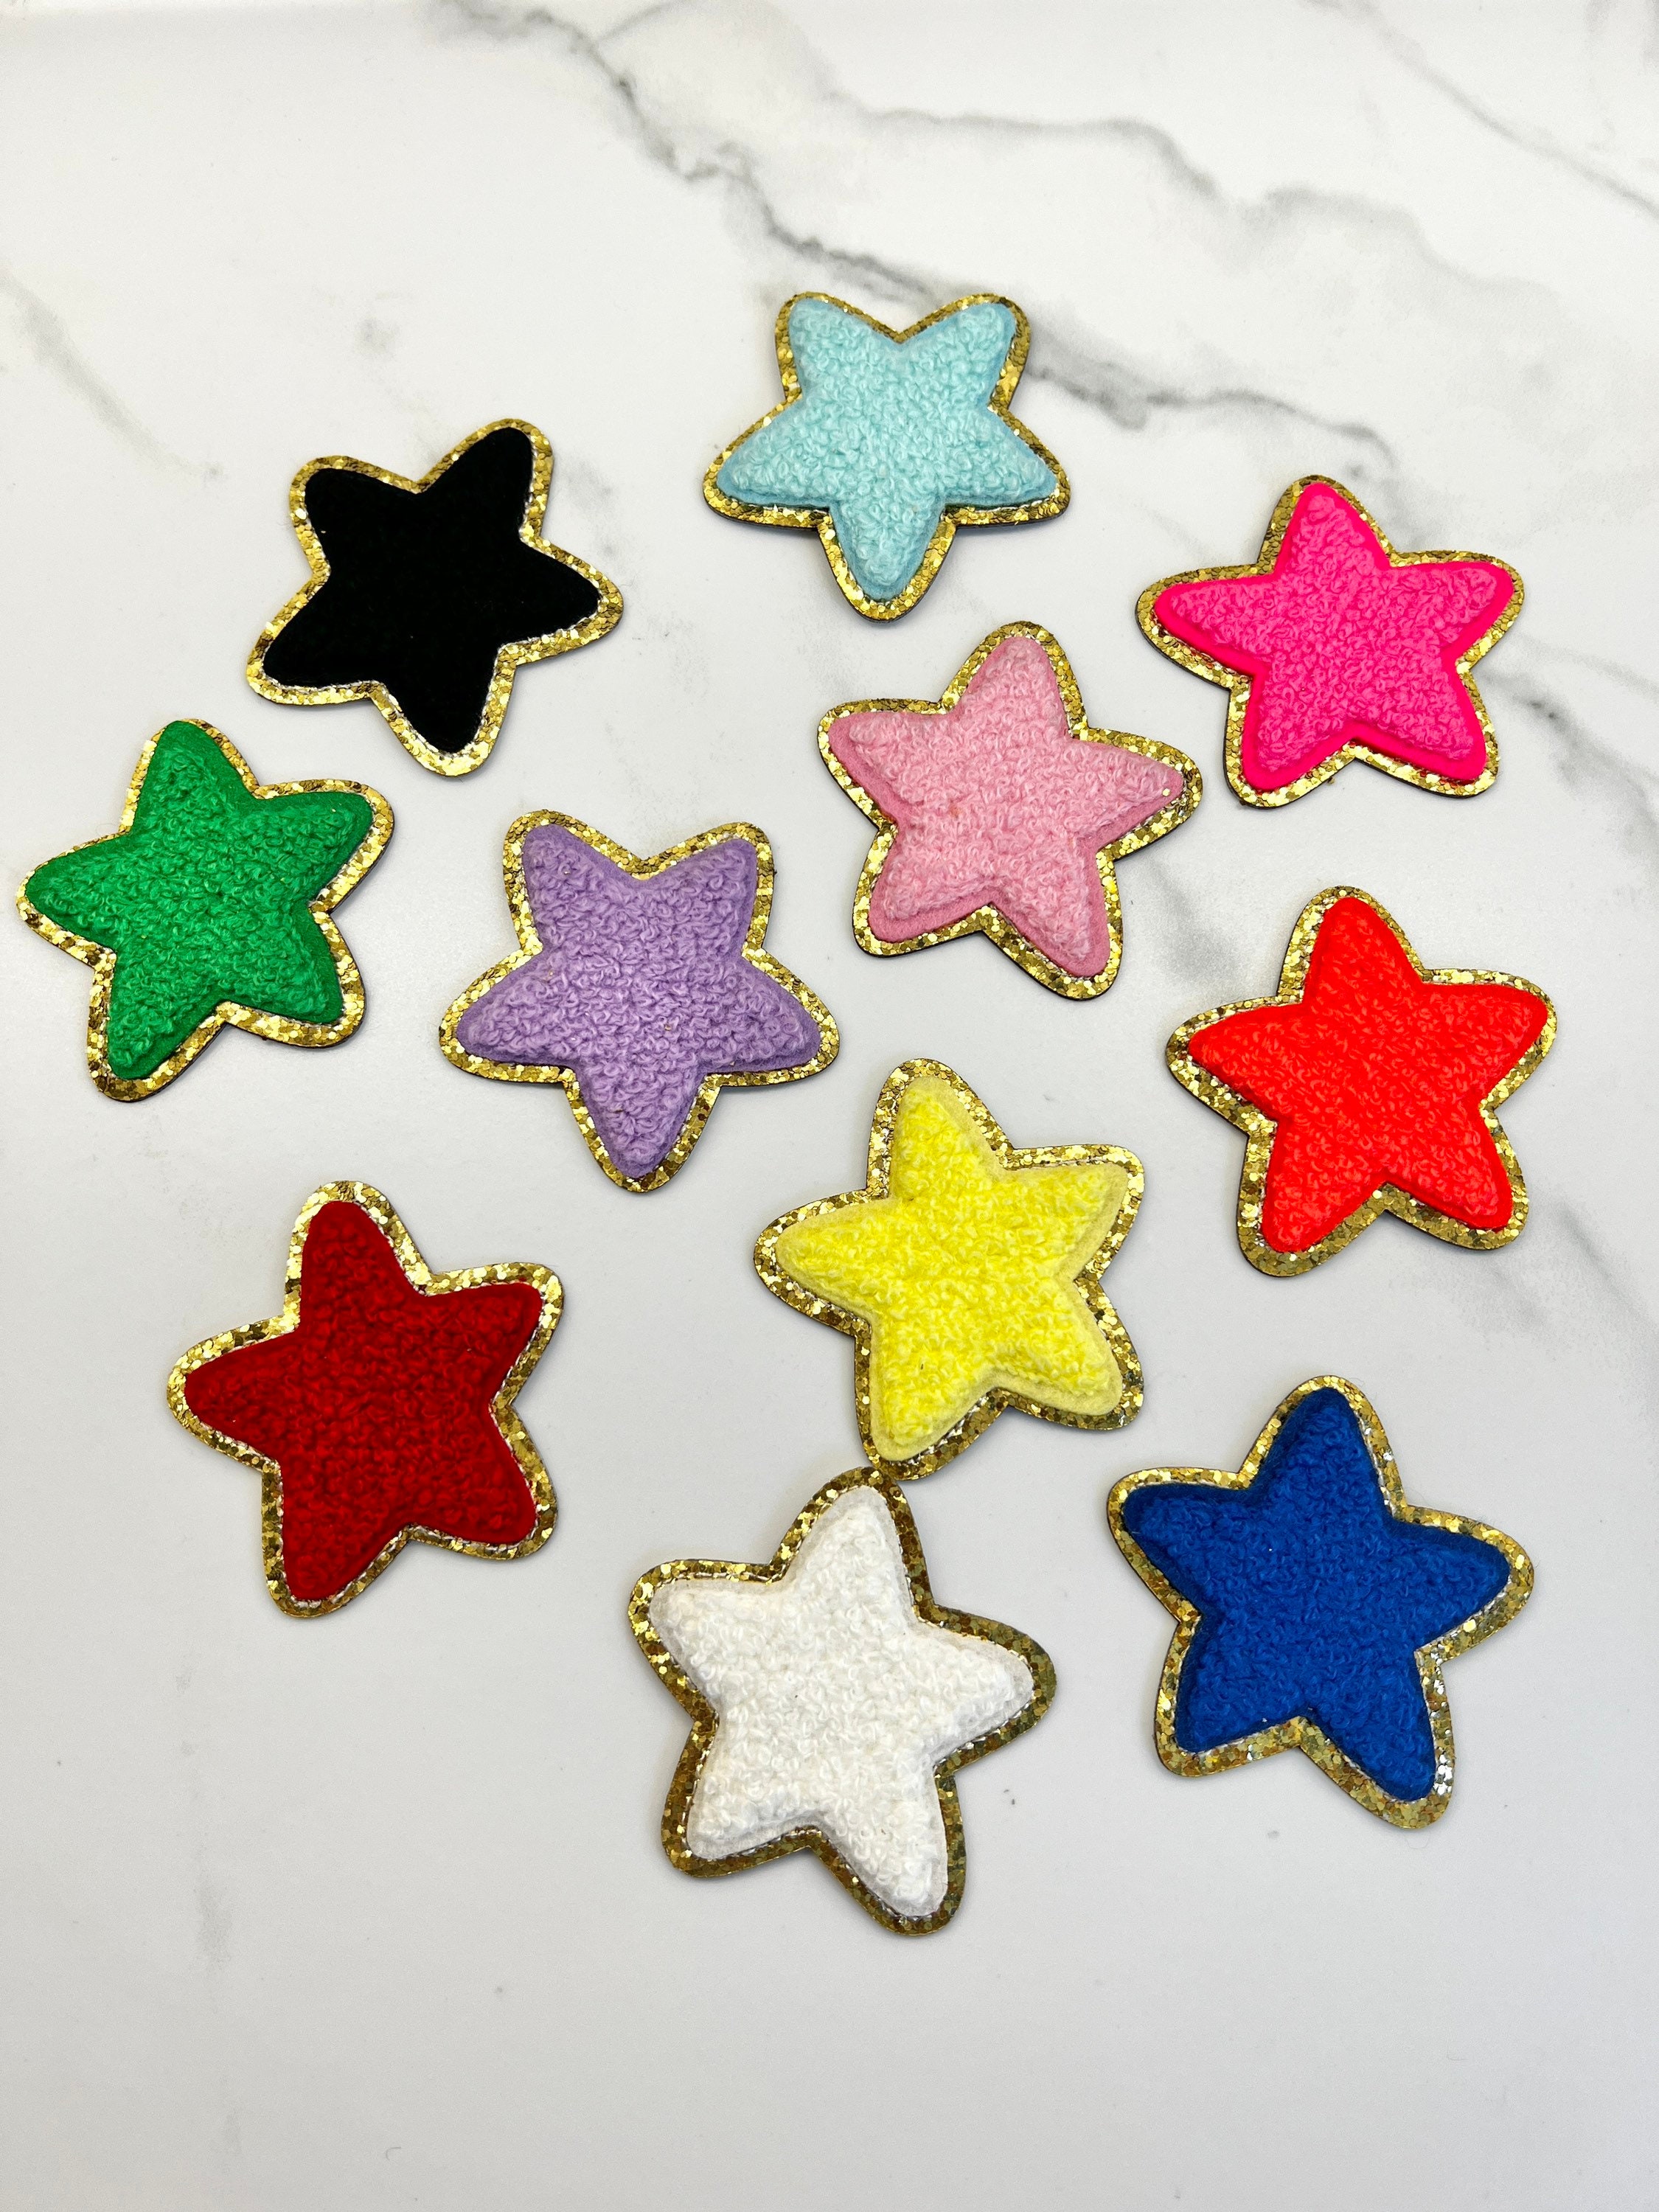 1.5 Mini Chenille SELF ADHESIVE Letter Patches 9 Colors Patch 